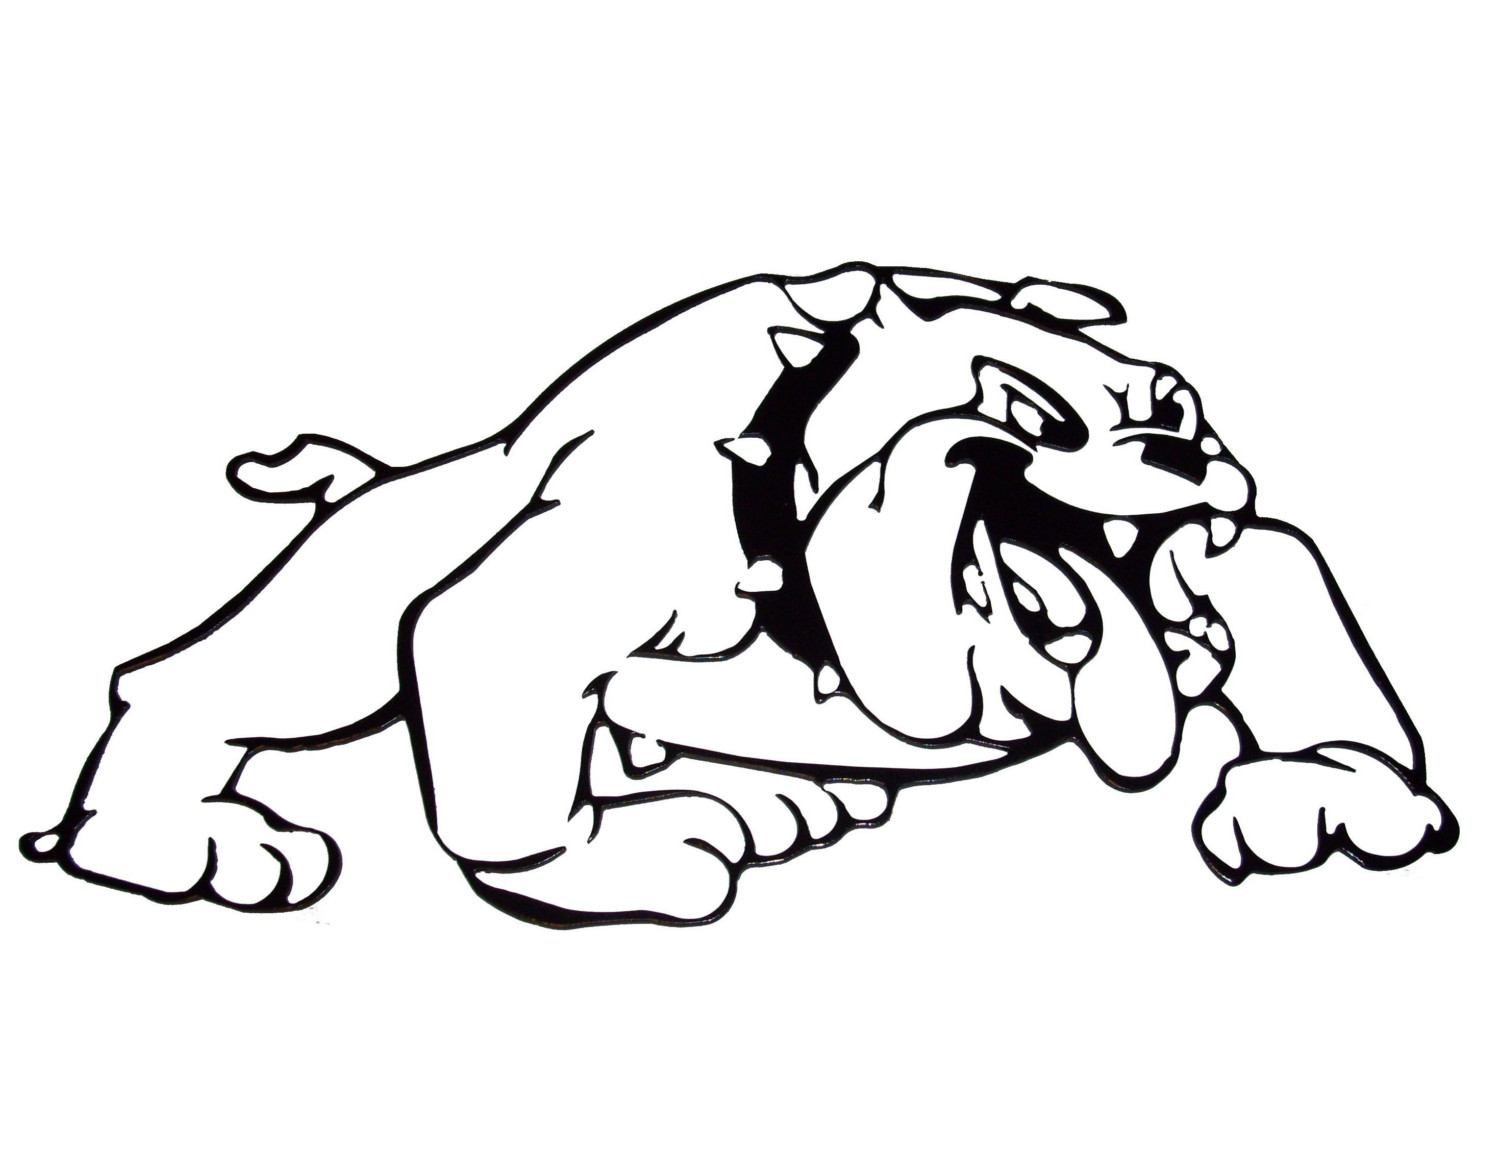 Bulldog coloring pages to download and print for free